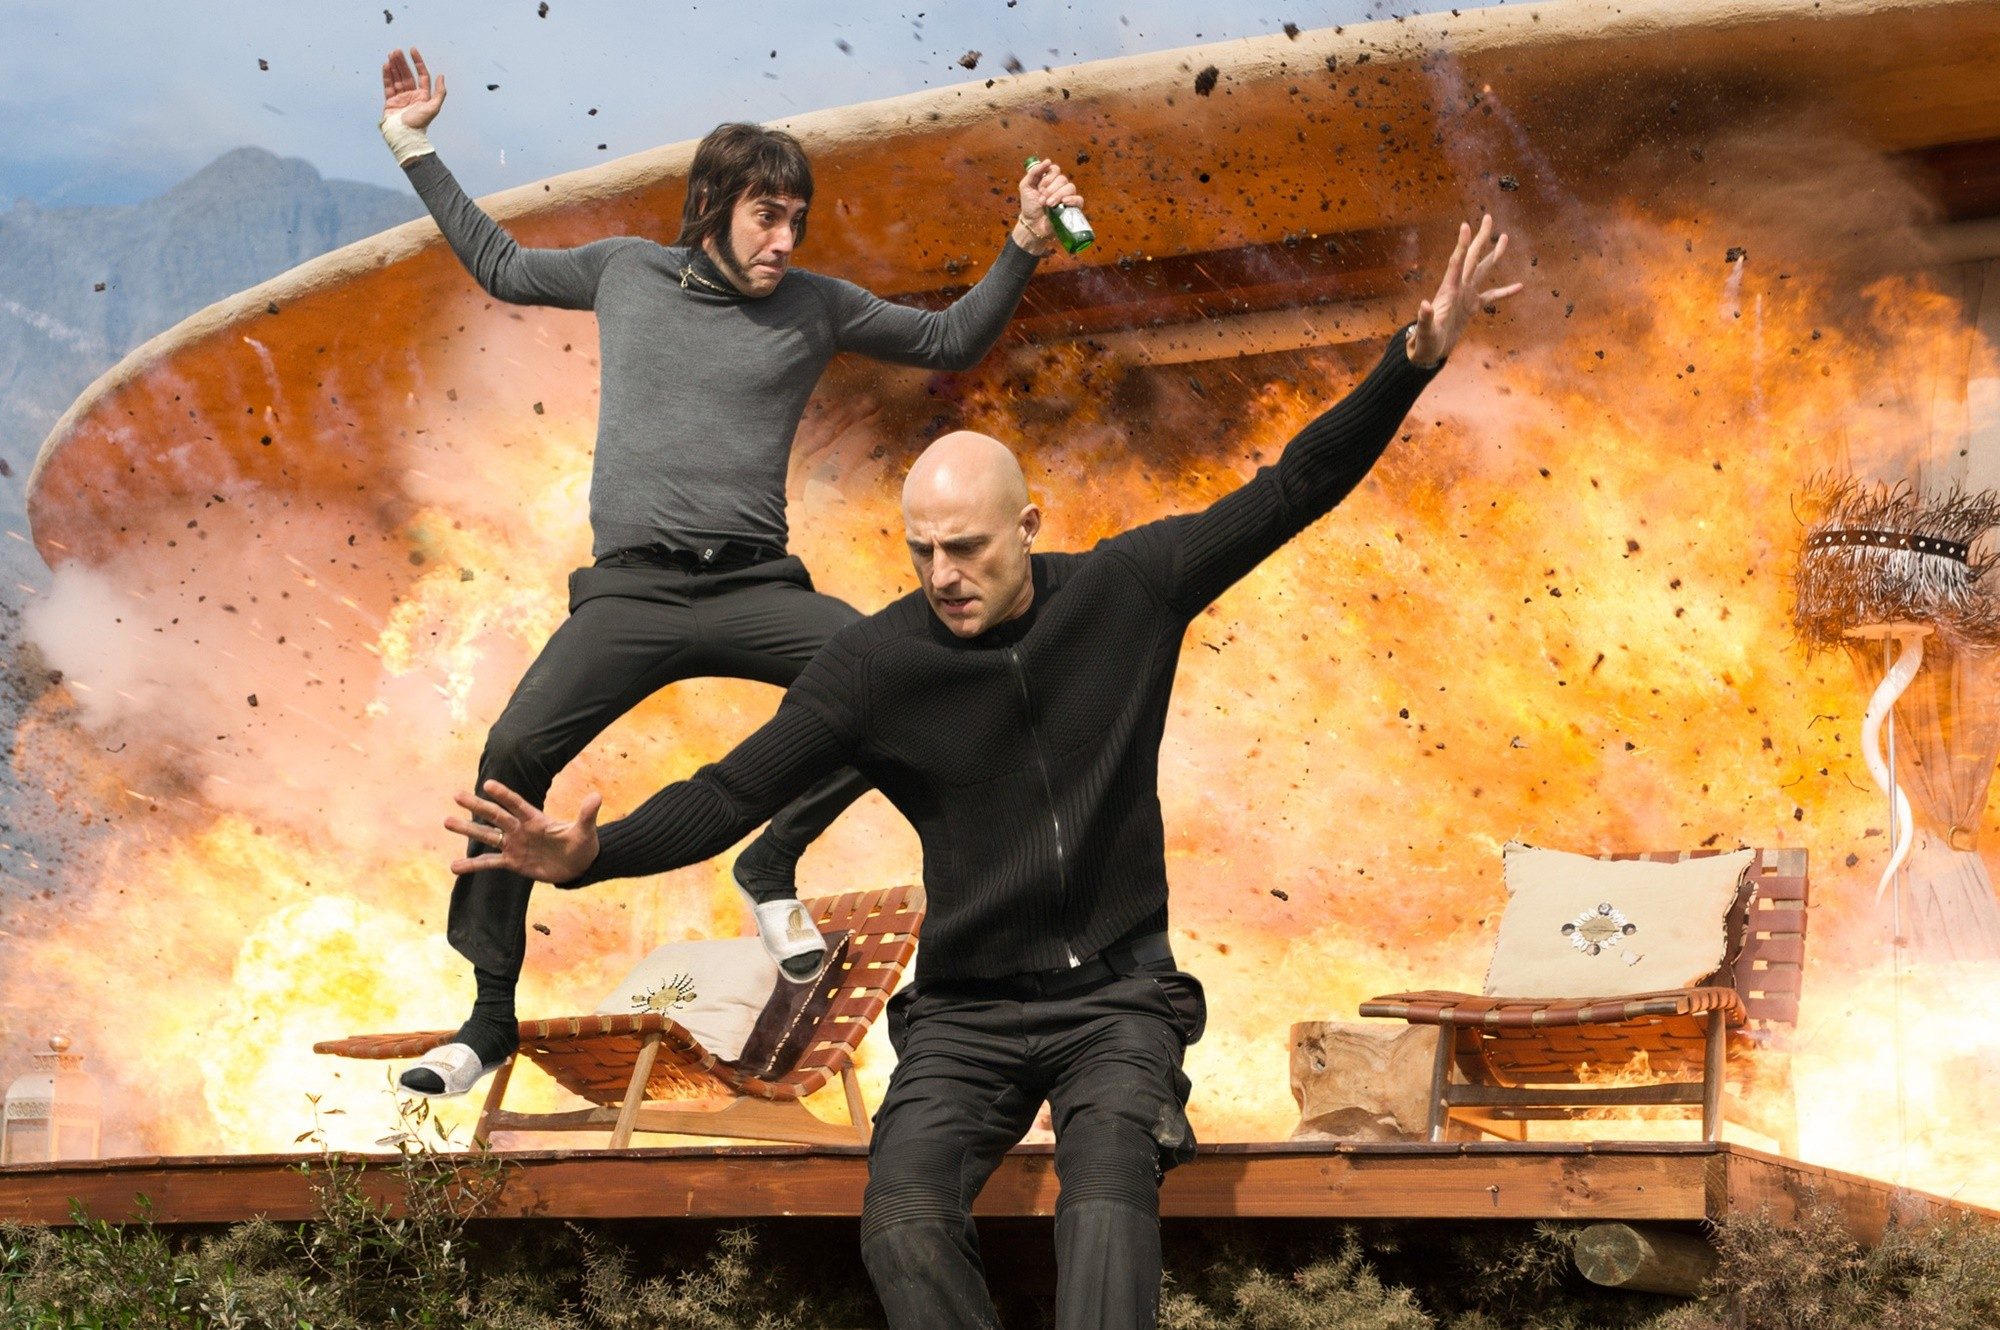 Sacha Baron Cohen and Mark Strong in Columbia Pictures' The Brothers Grimsby (2016)